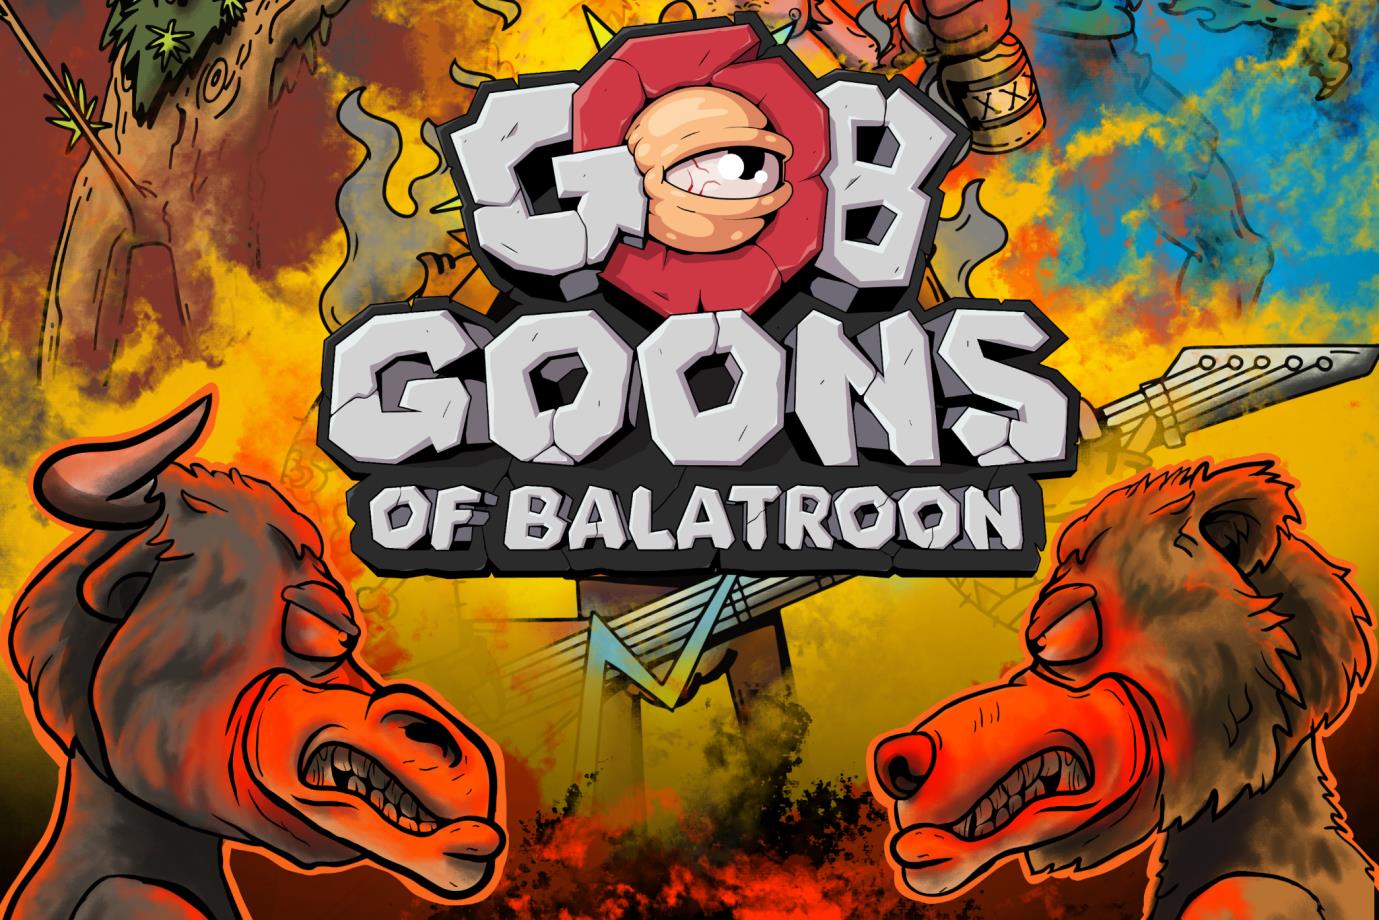 Play 2 Earn NFT Project 'Goons of Balatroon' Launches Genesis Goon Card Pack 1